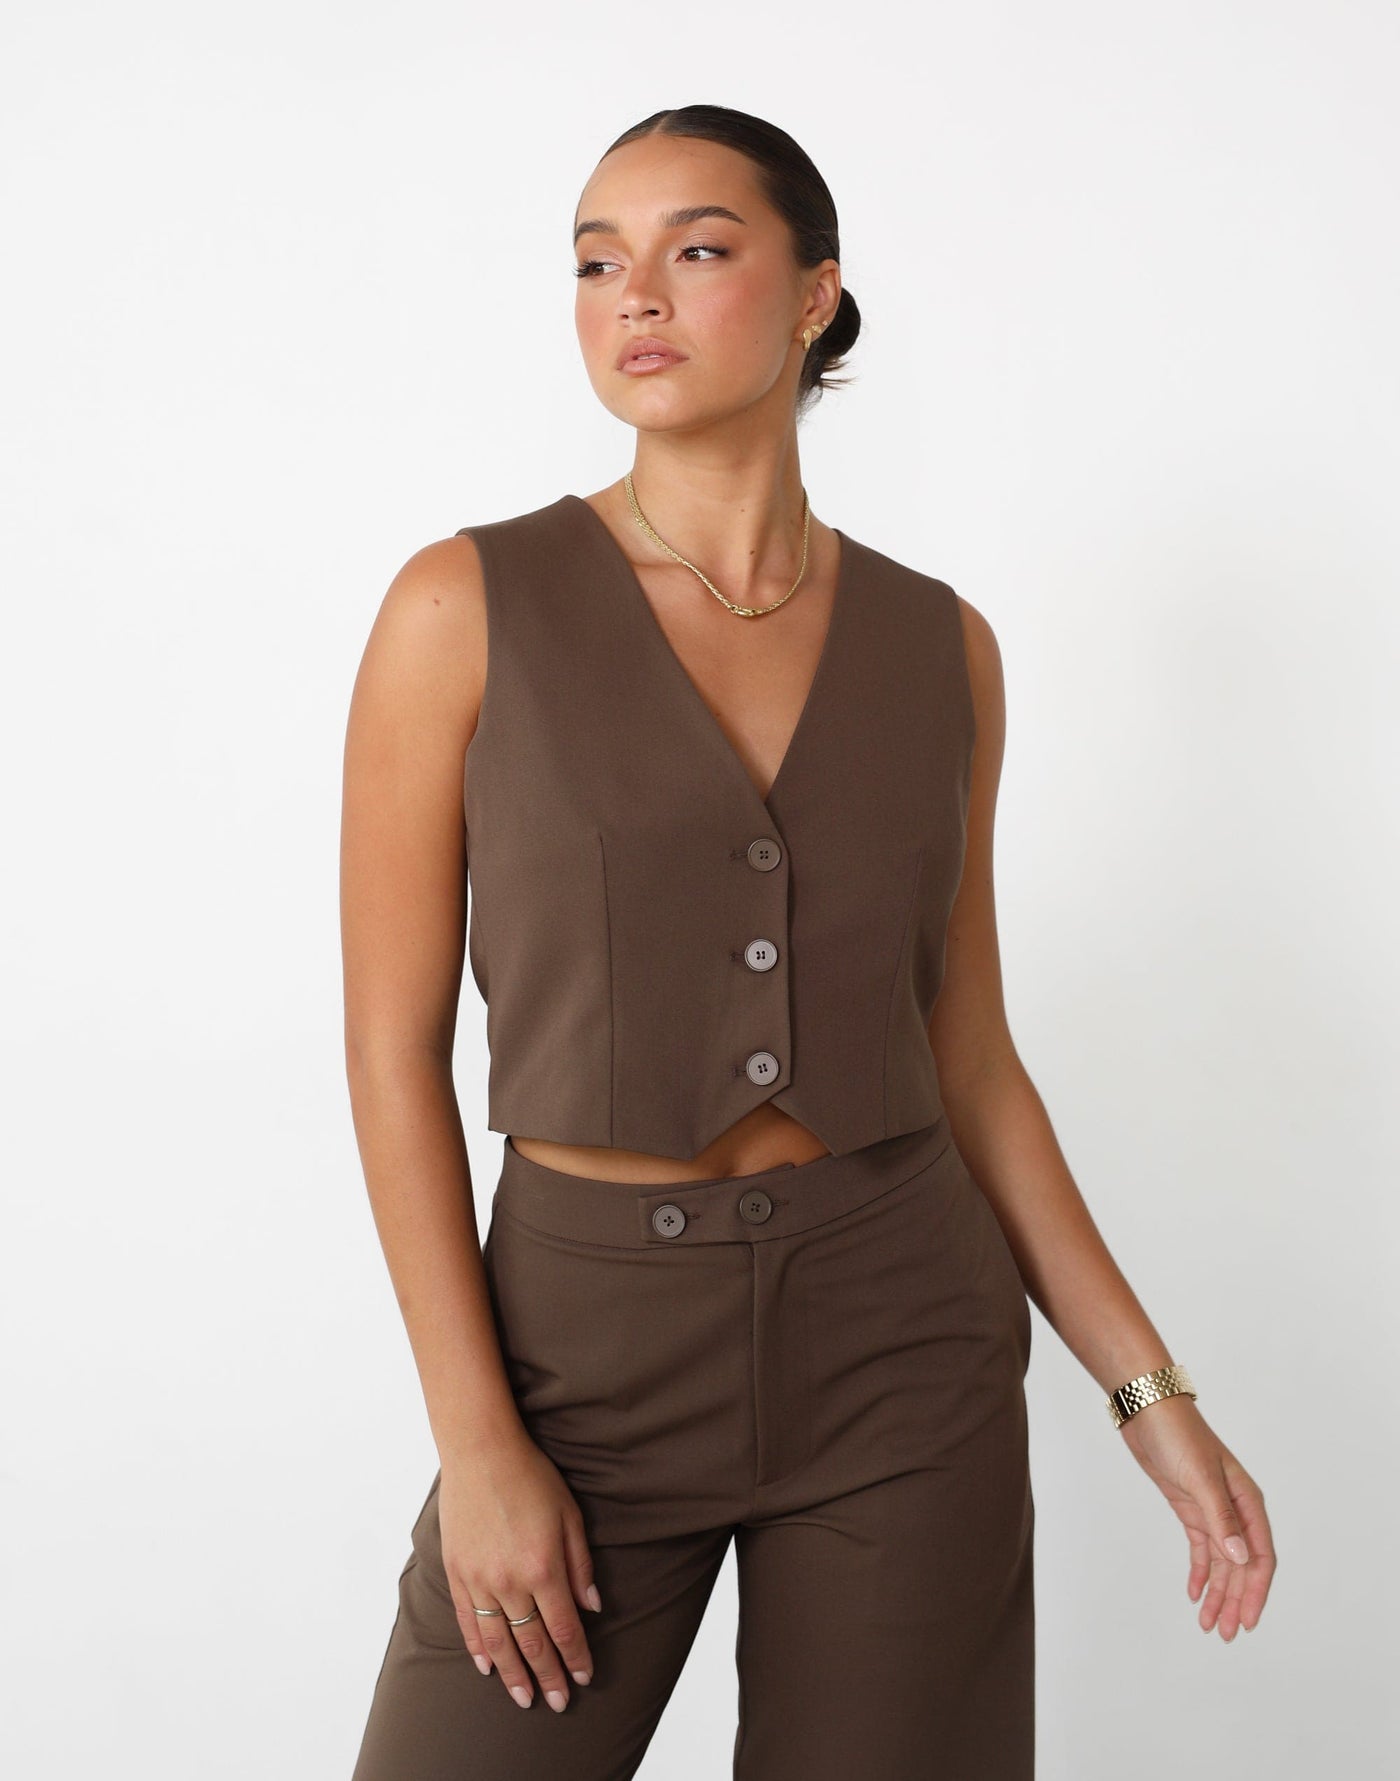 Astylar Vest Top (Coffee) - Button Closure Vest Top - Women's Top - Charcoal Clothing